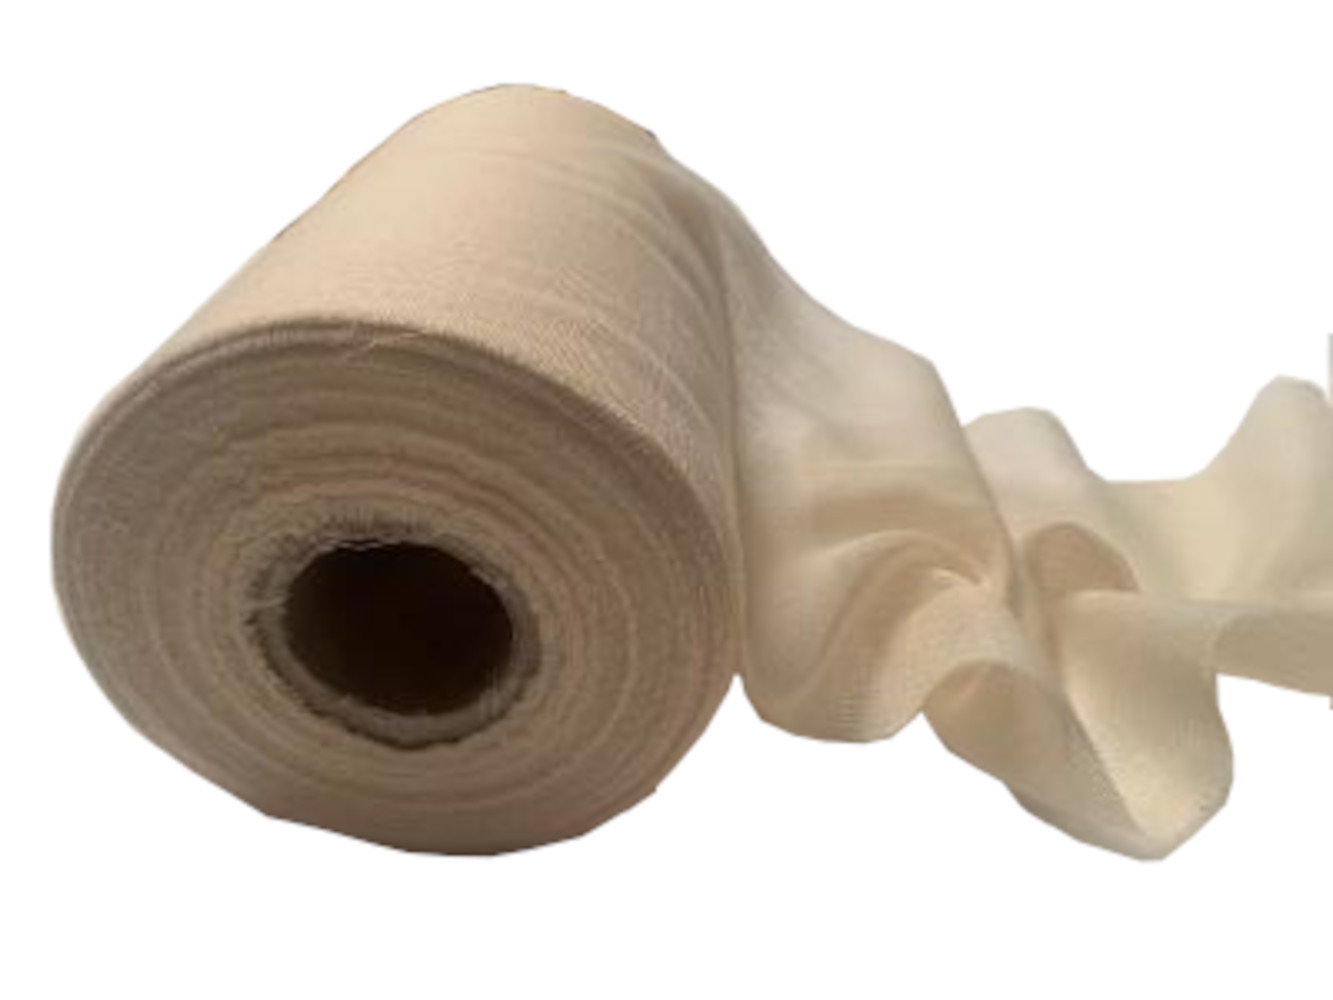 8" UnBleached Grade 50 Cheesecloth Roll - 100 Yards